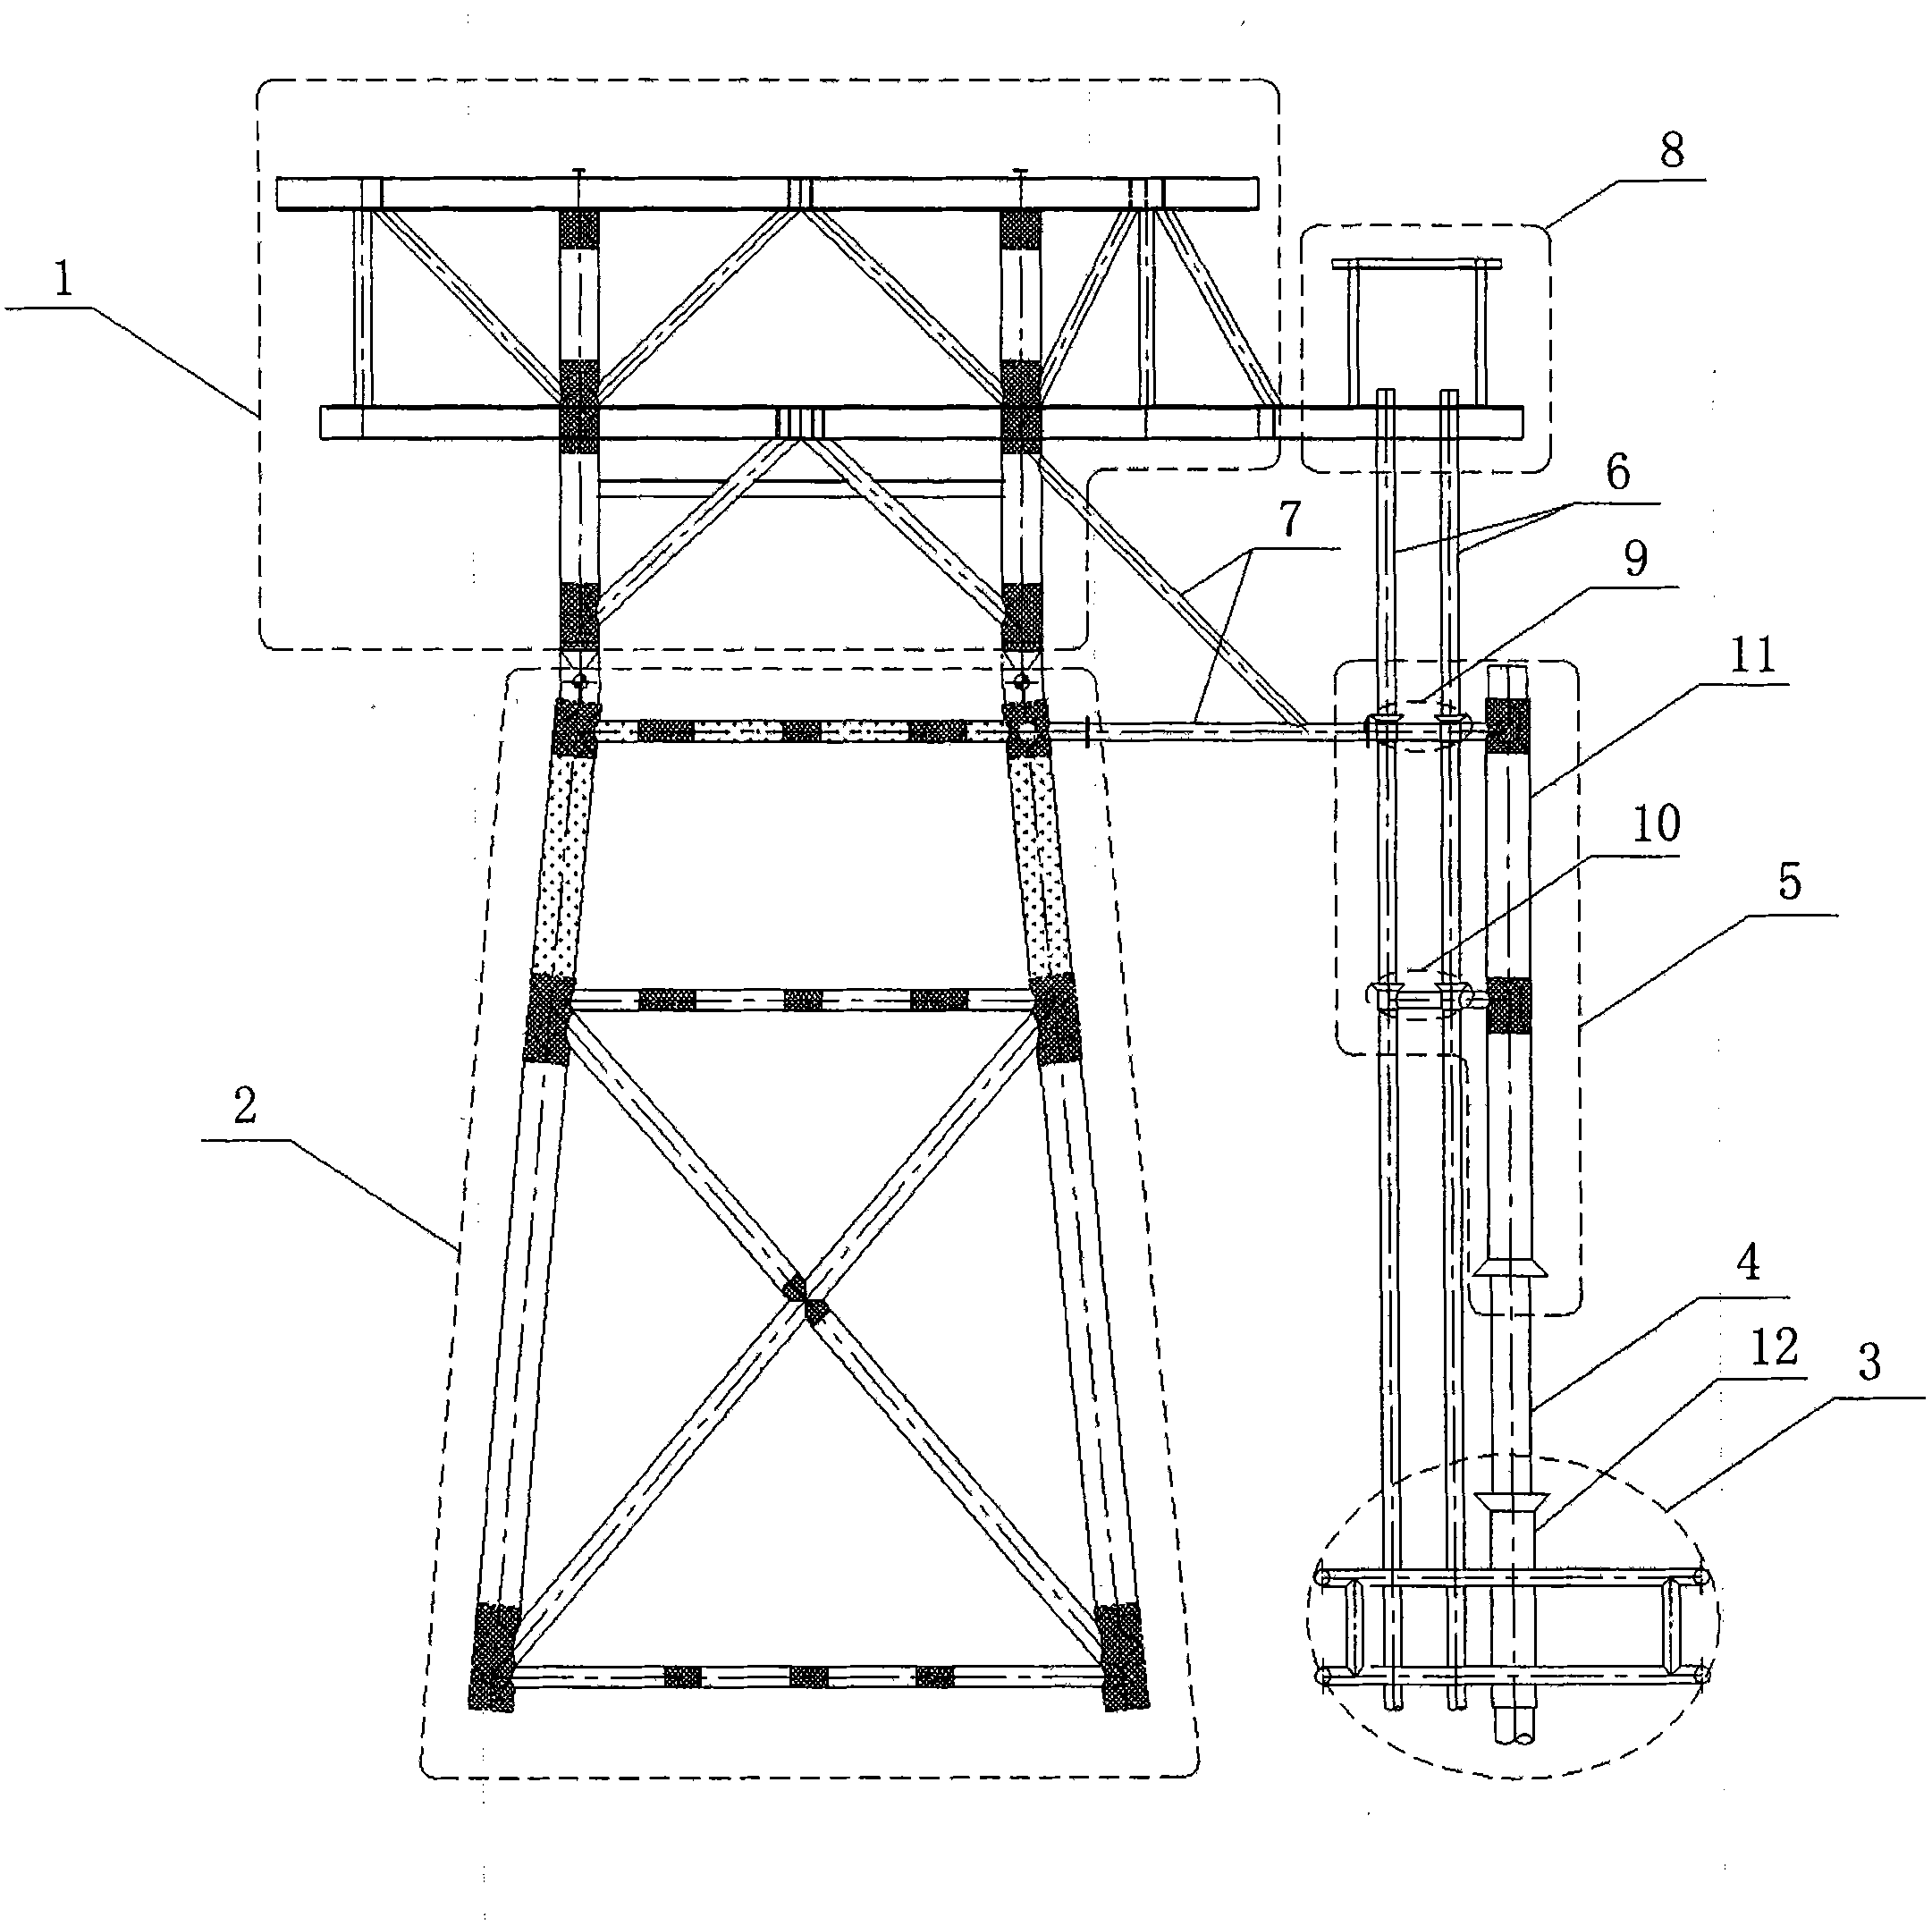 Method for increasing well slots without stopping production on offshore petroleum platform